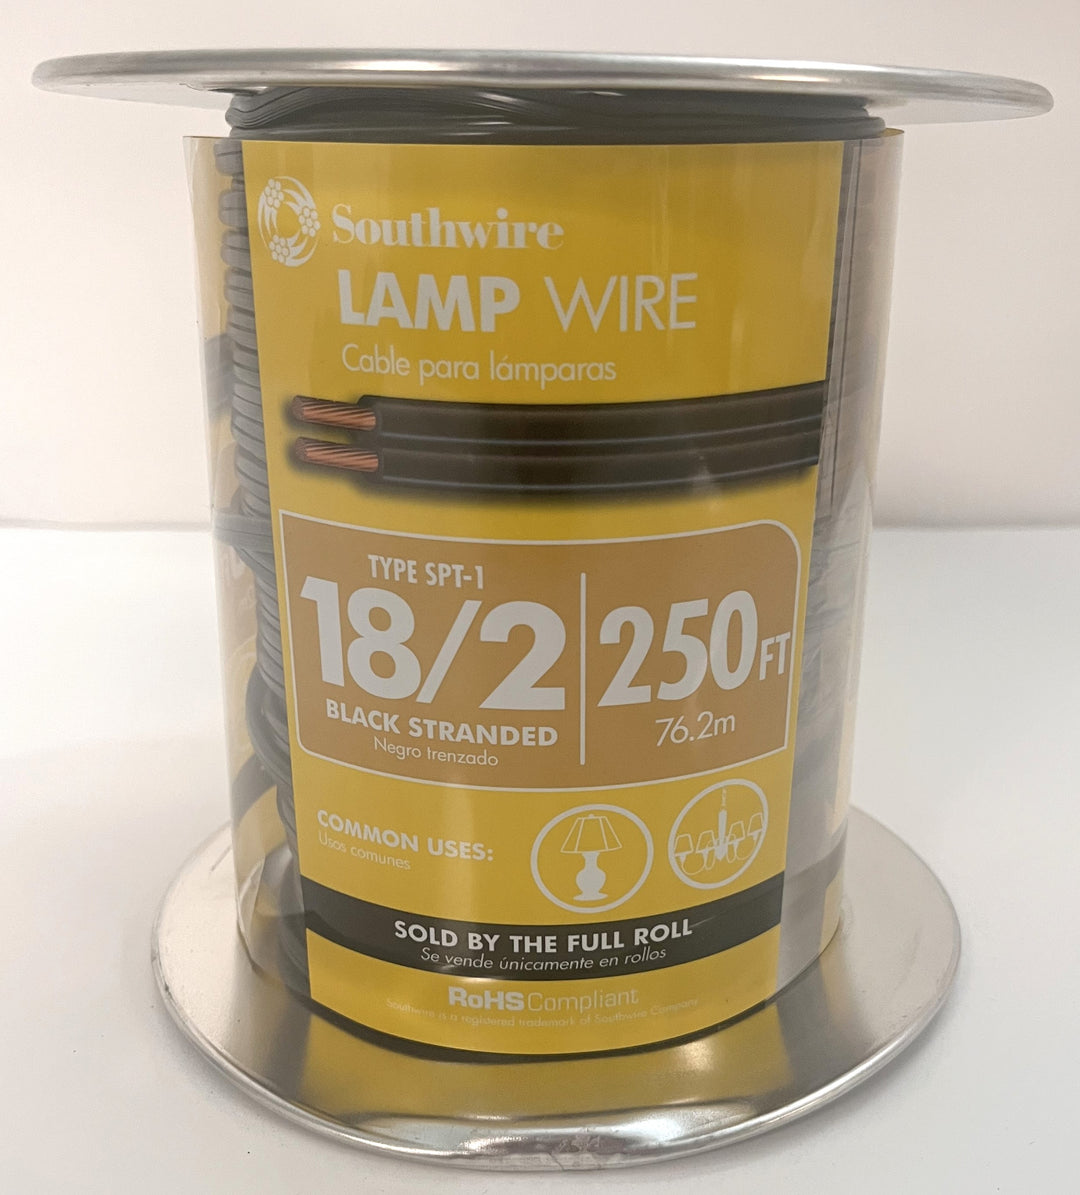 Southwire Lamp Wire 18/2, 250 ft.